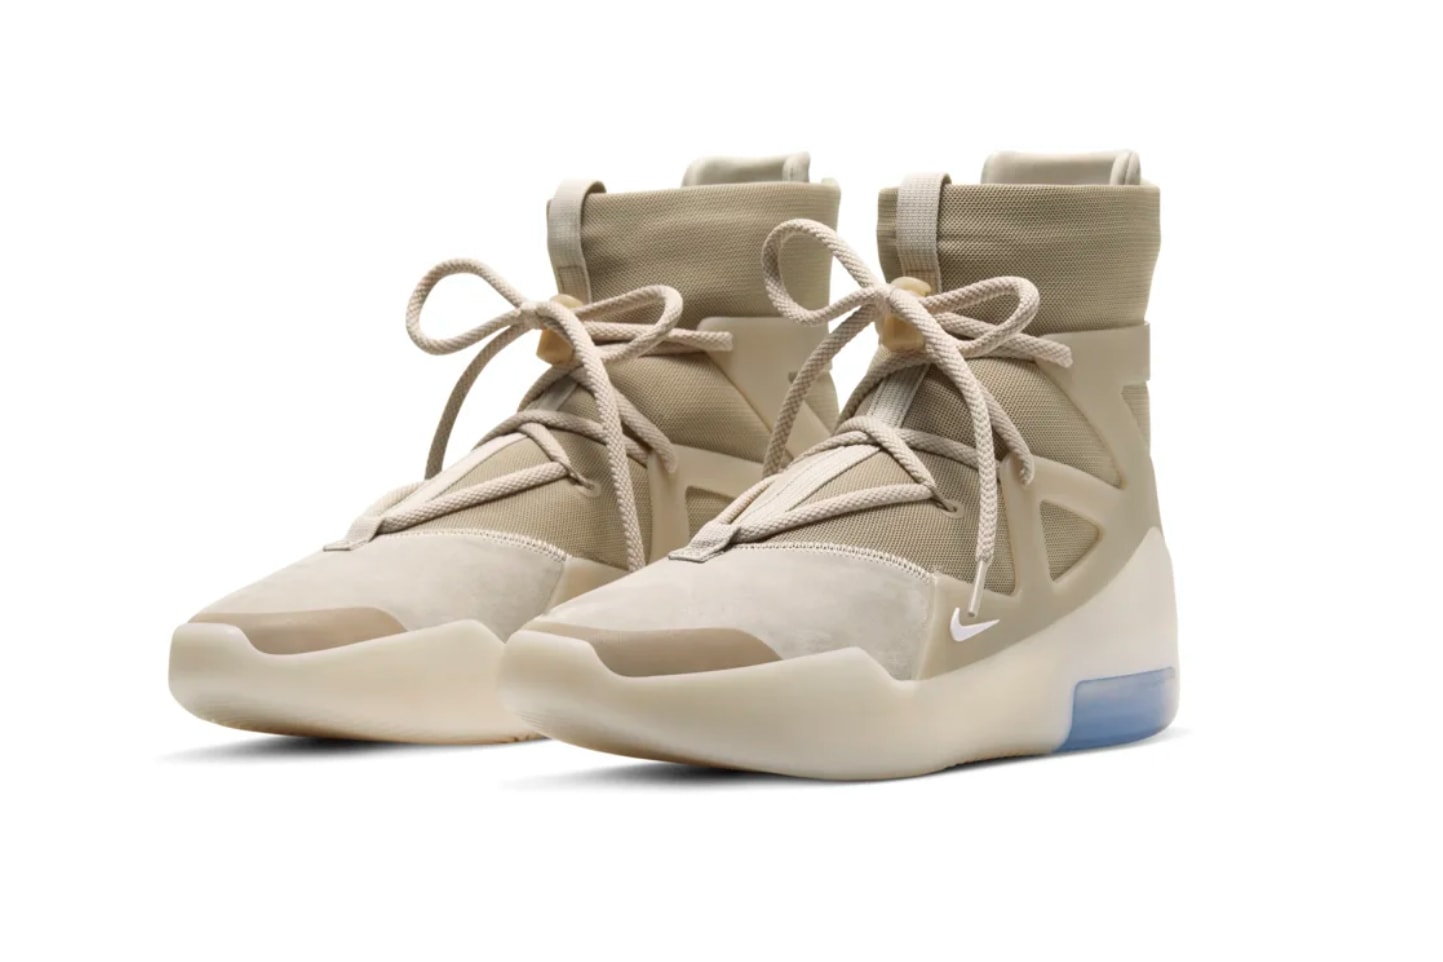 Nike Air Fear of God 1 “Oatmeal” official look release information Jerry Lorenzo Leo Chang basketball fashion military collaborations 